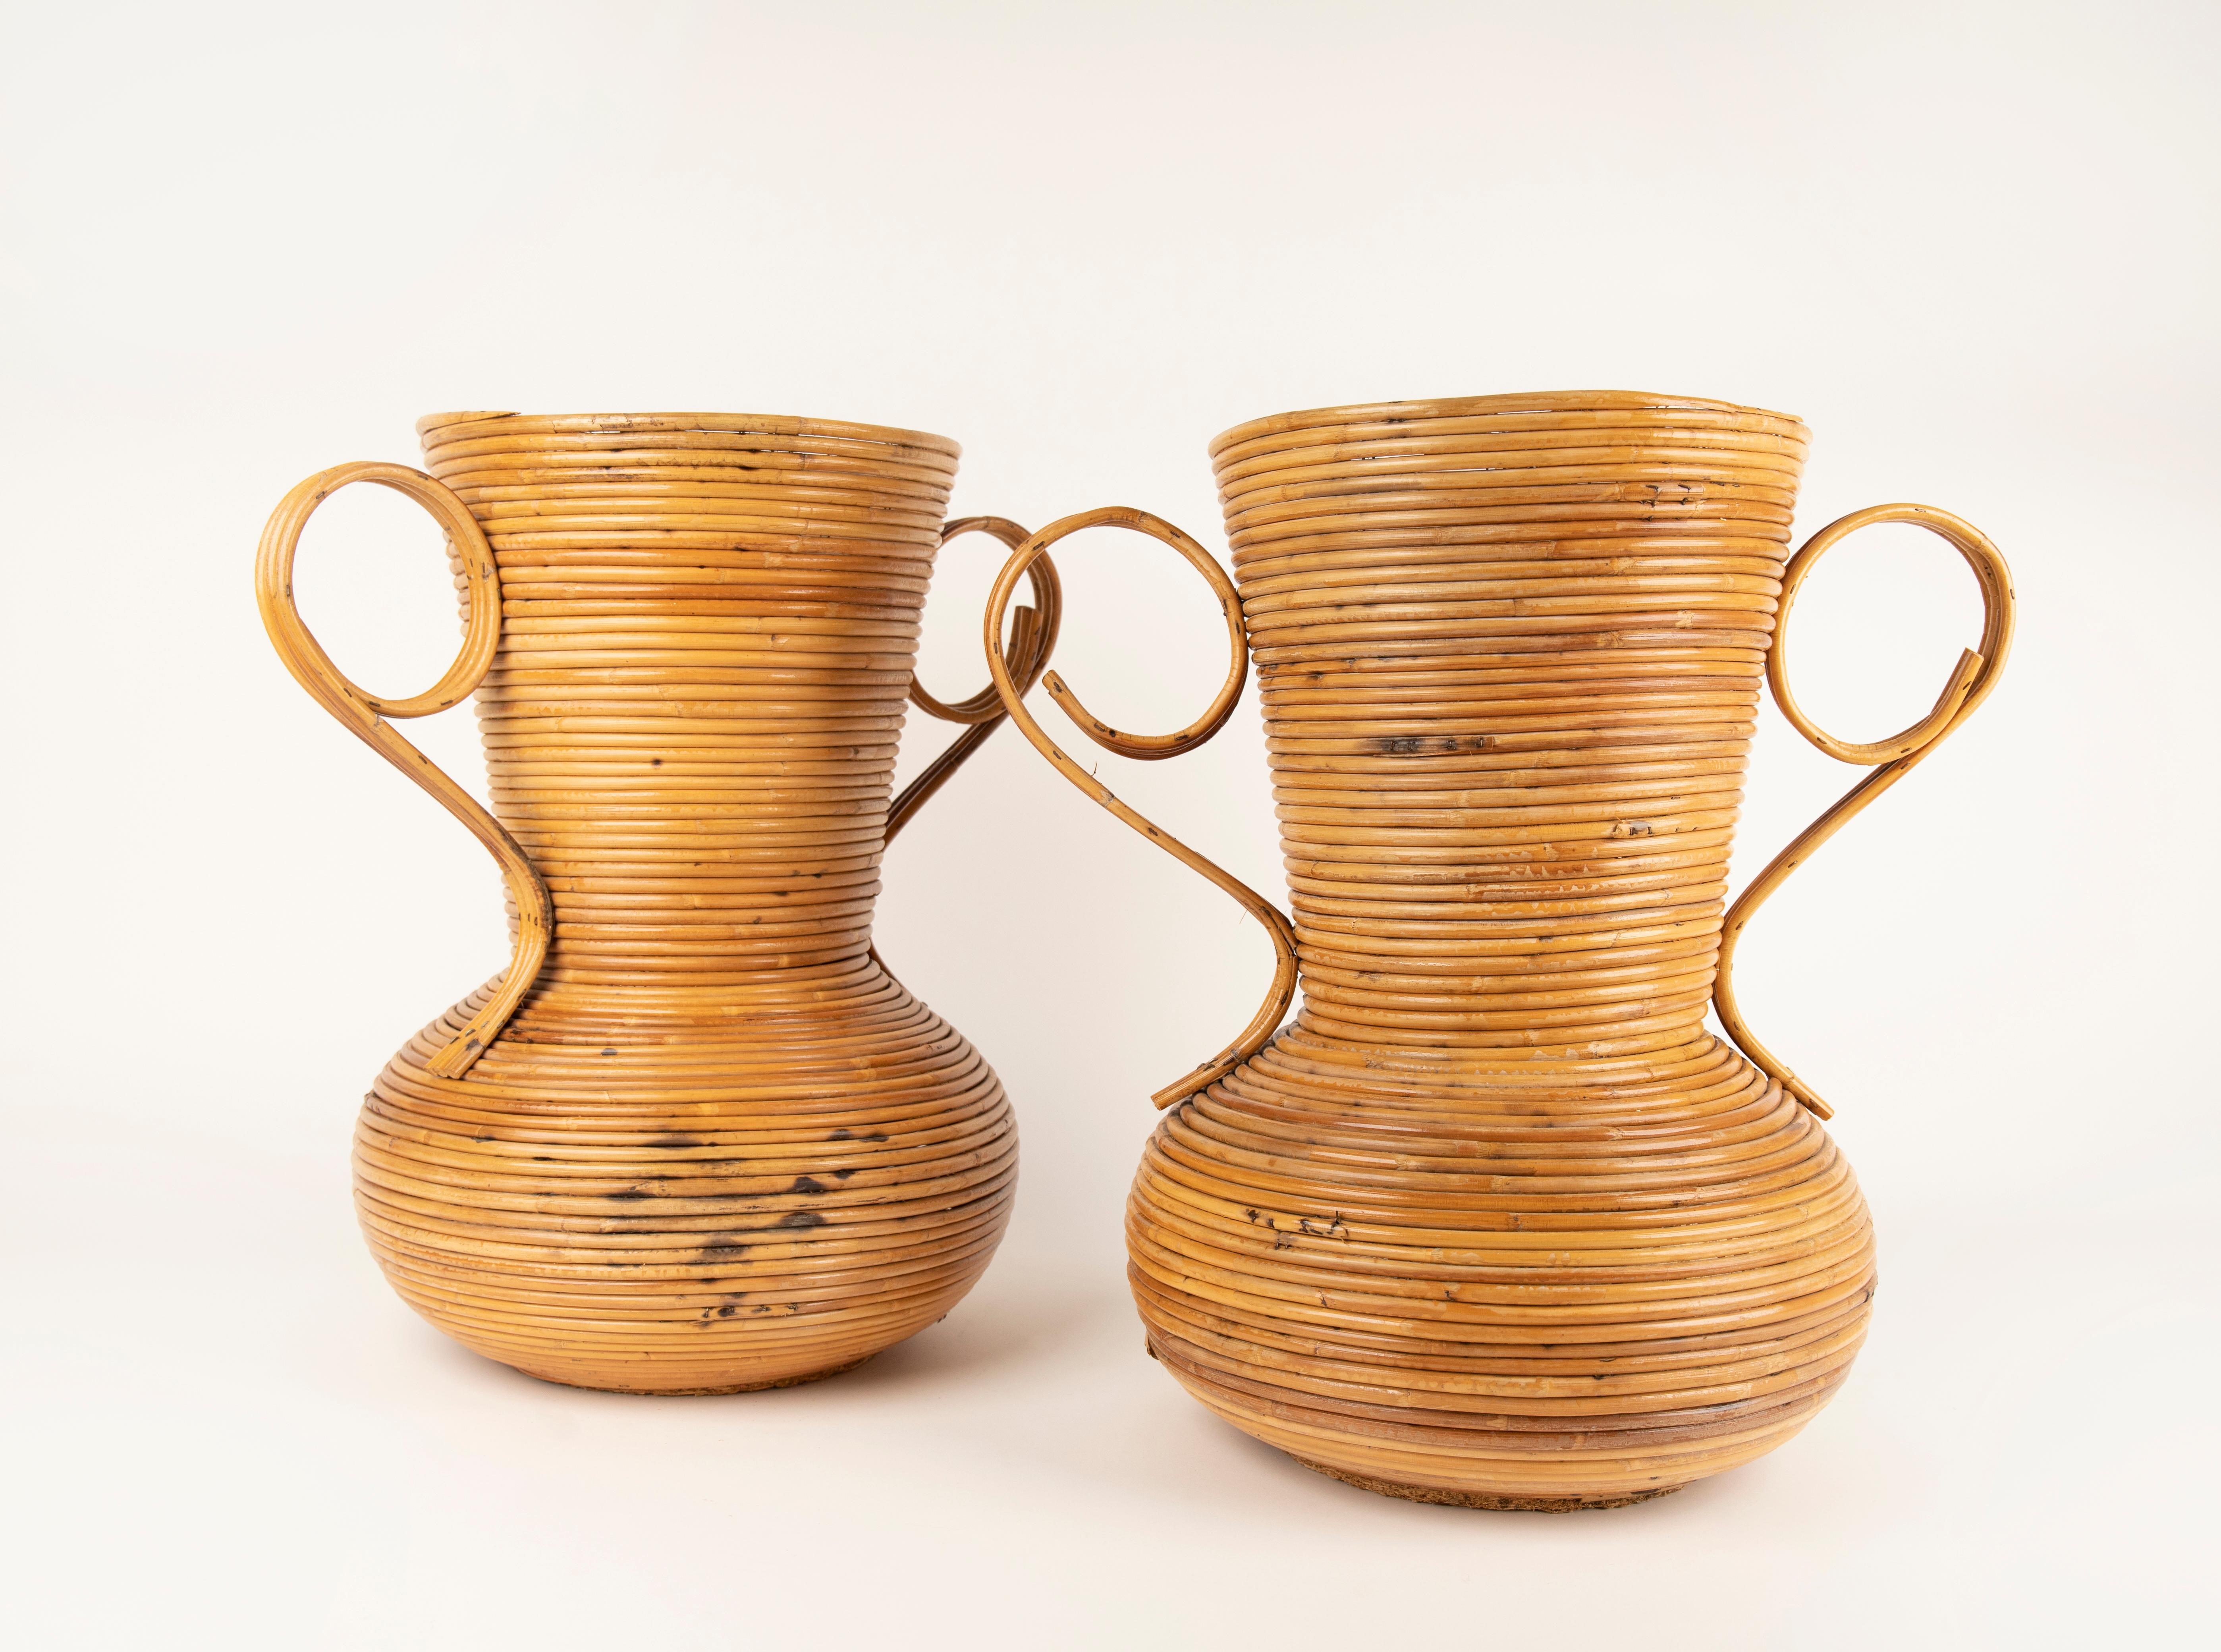 Pair of Rattan Amphoras Vases by Vivai del Sud, Italy 1960s For Sale 3